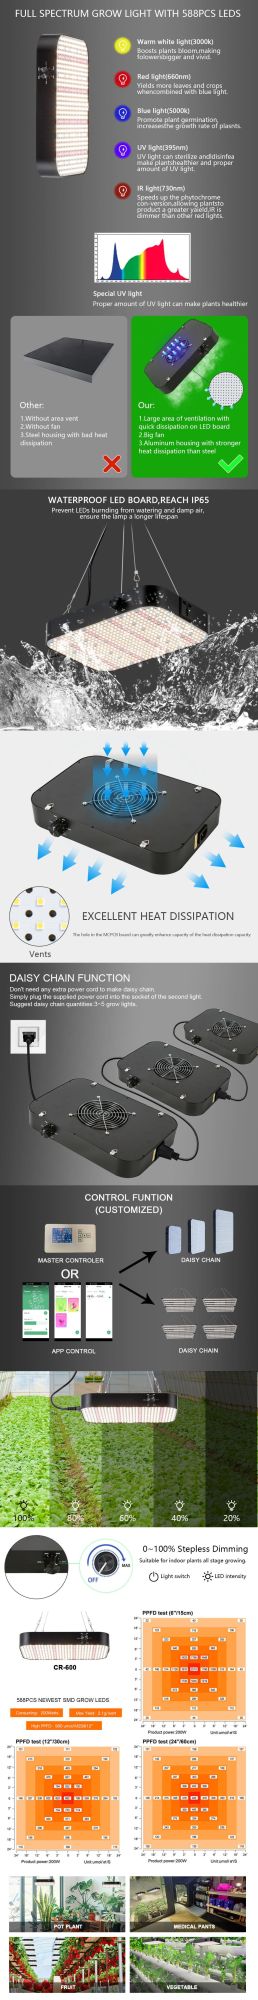 FCC CE RoHS New Patent Black and White 60W 80W 130W 200W Full Spectrum 0-100% Dimmable Daisy Chain Function High Ppf Flower Plant Grow Lighting